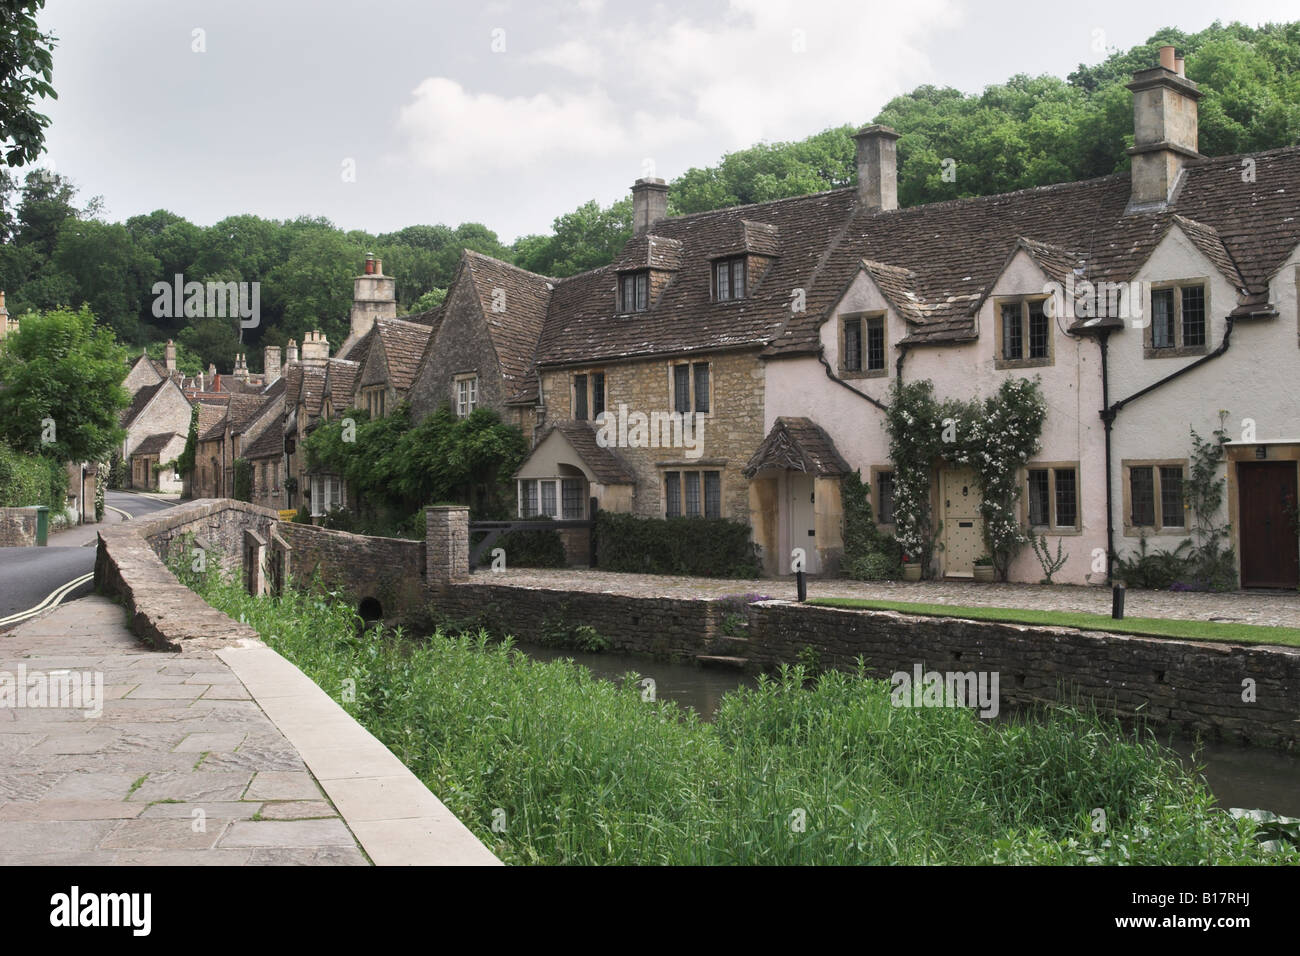 Picturesque cottages overlooking By Brook bridge and the river which runs through Castle Combe, The Cotswolds, Wiltshire, England, UK Stock Photo